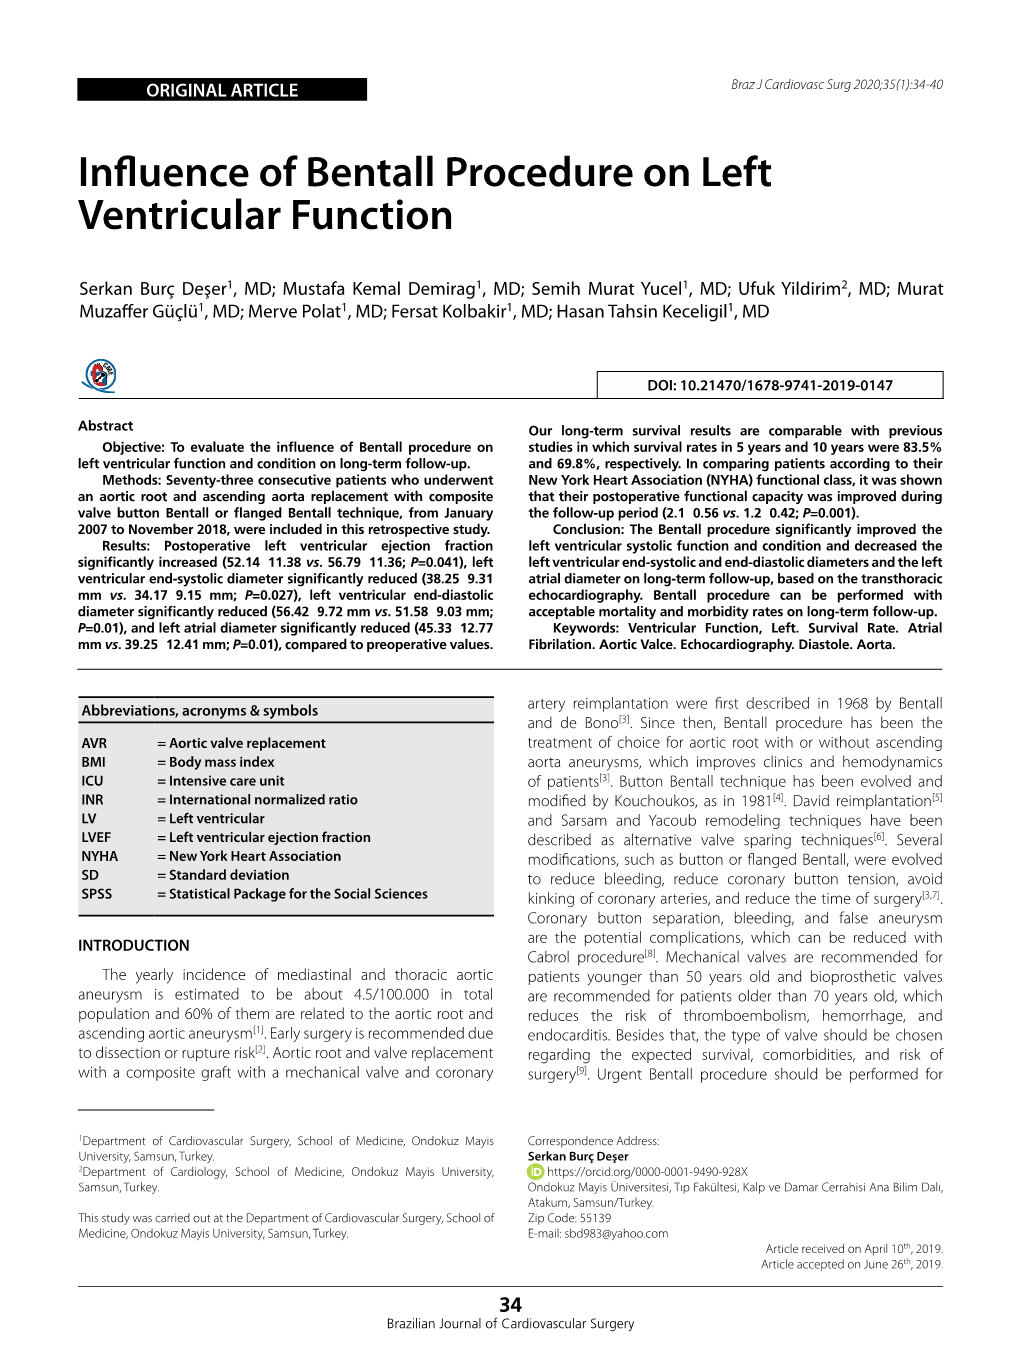 Influence of Bentall Procedure on Left Ventricular Function